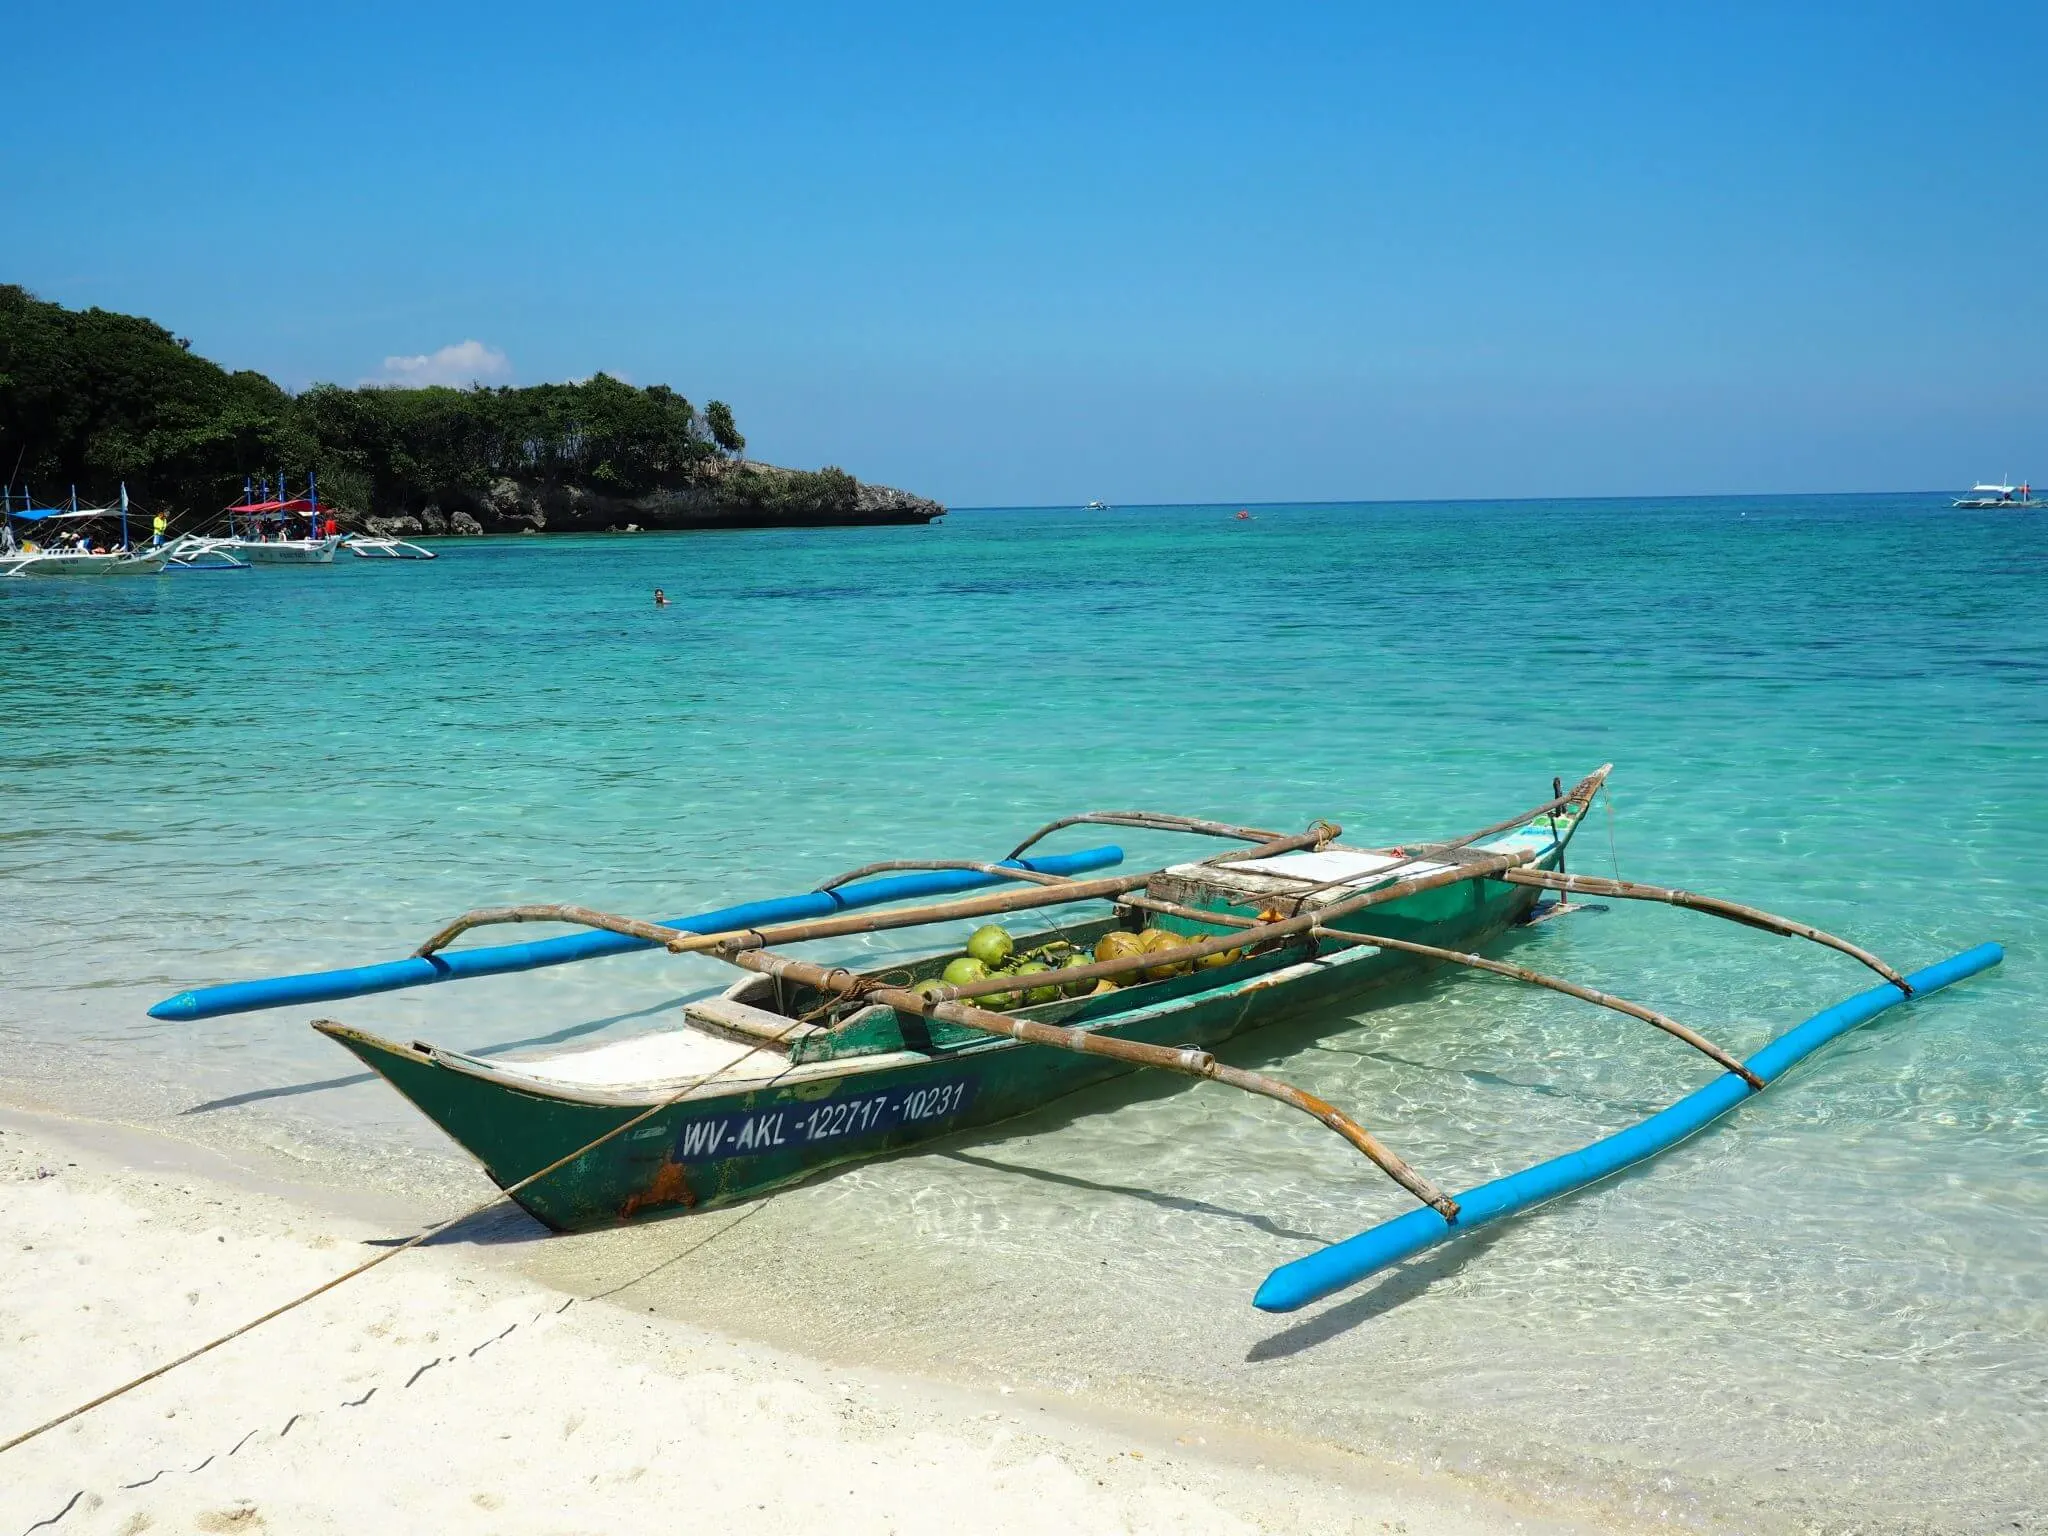 Travel Tips for the Philippines